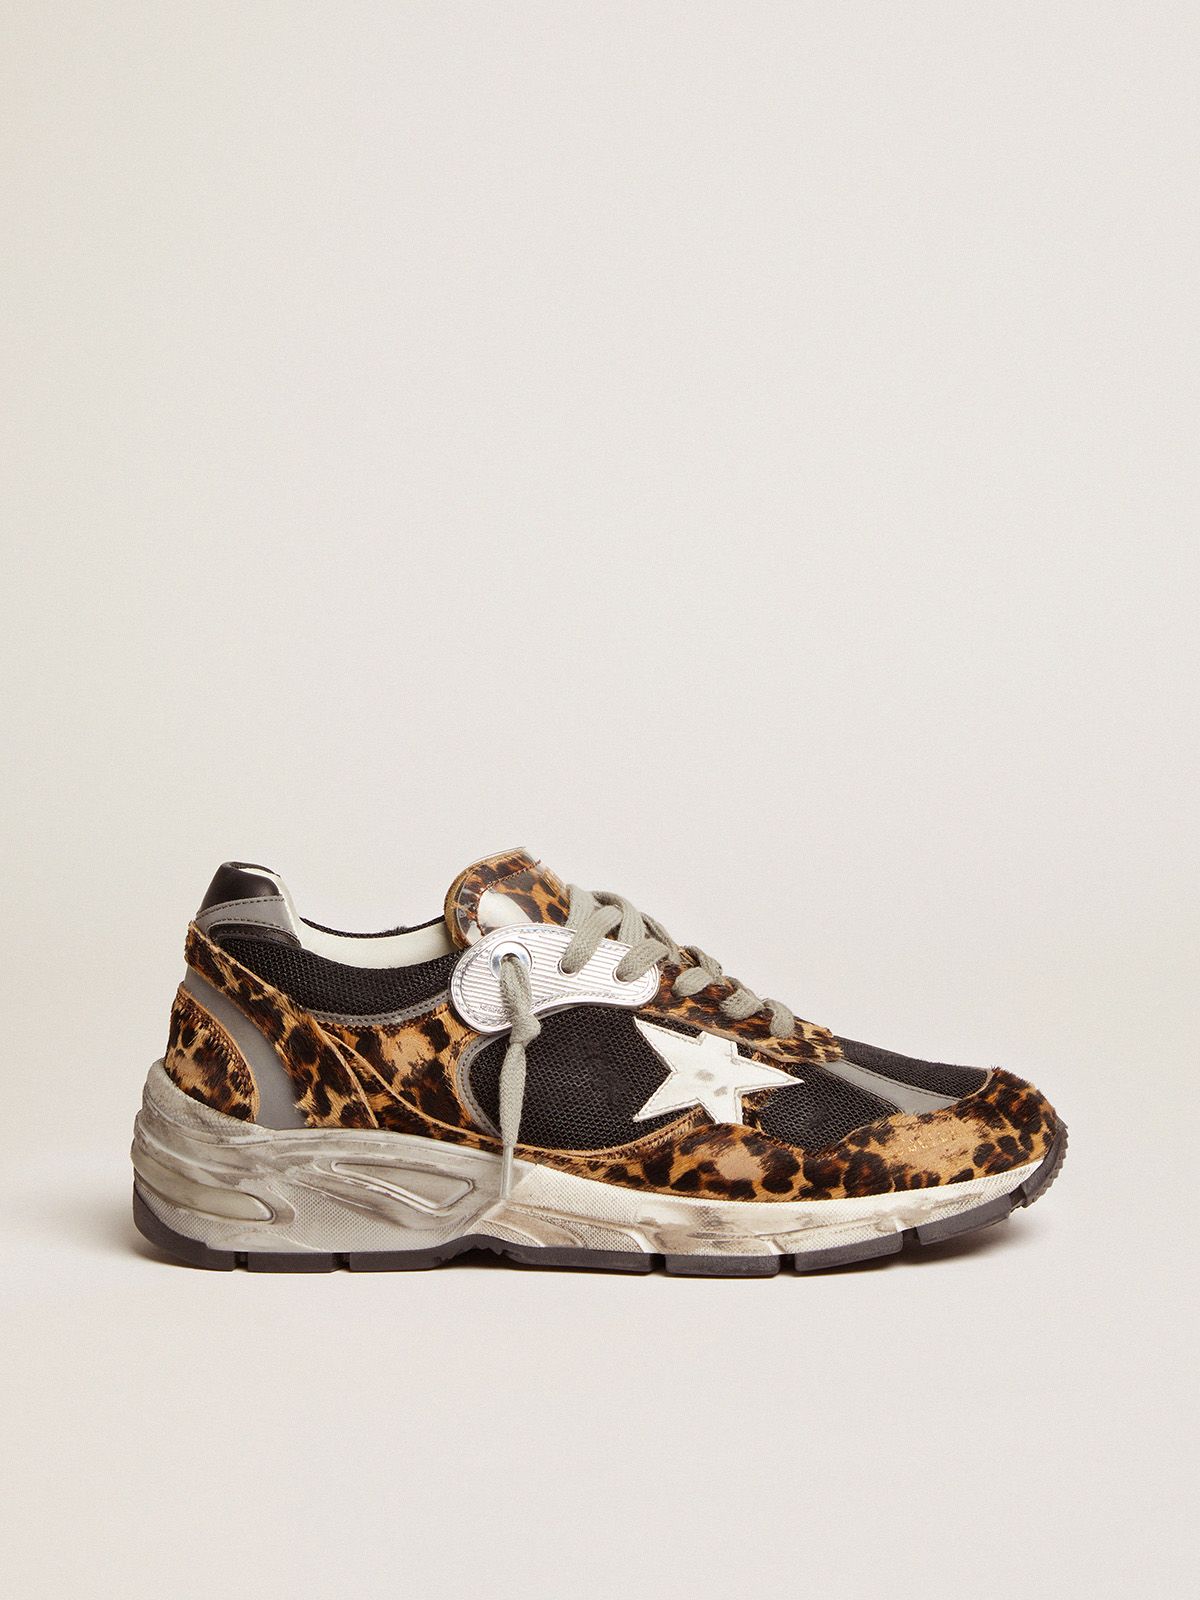 golden goose white pony leopard-print Dad-Star skin star in with leather sneakers